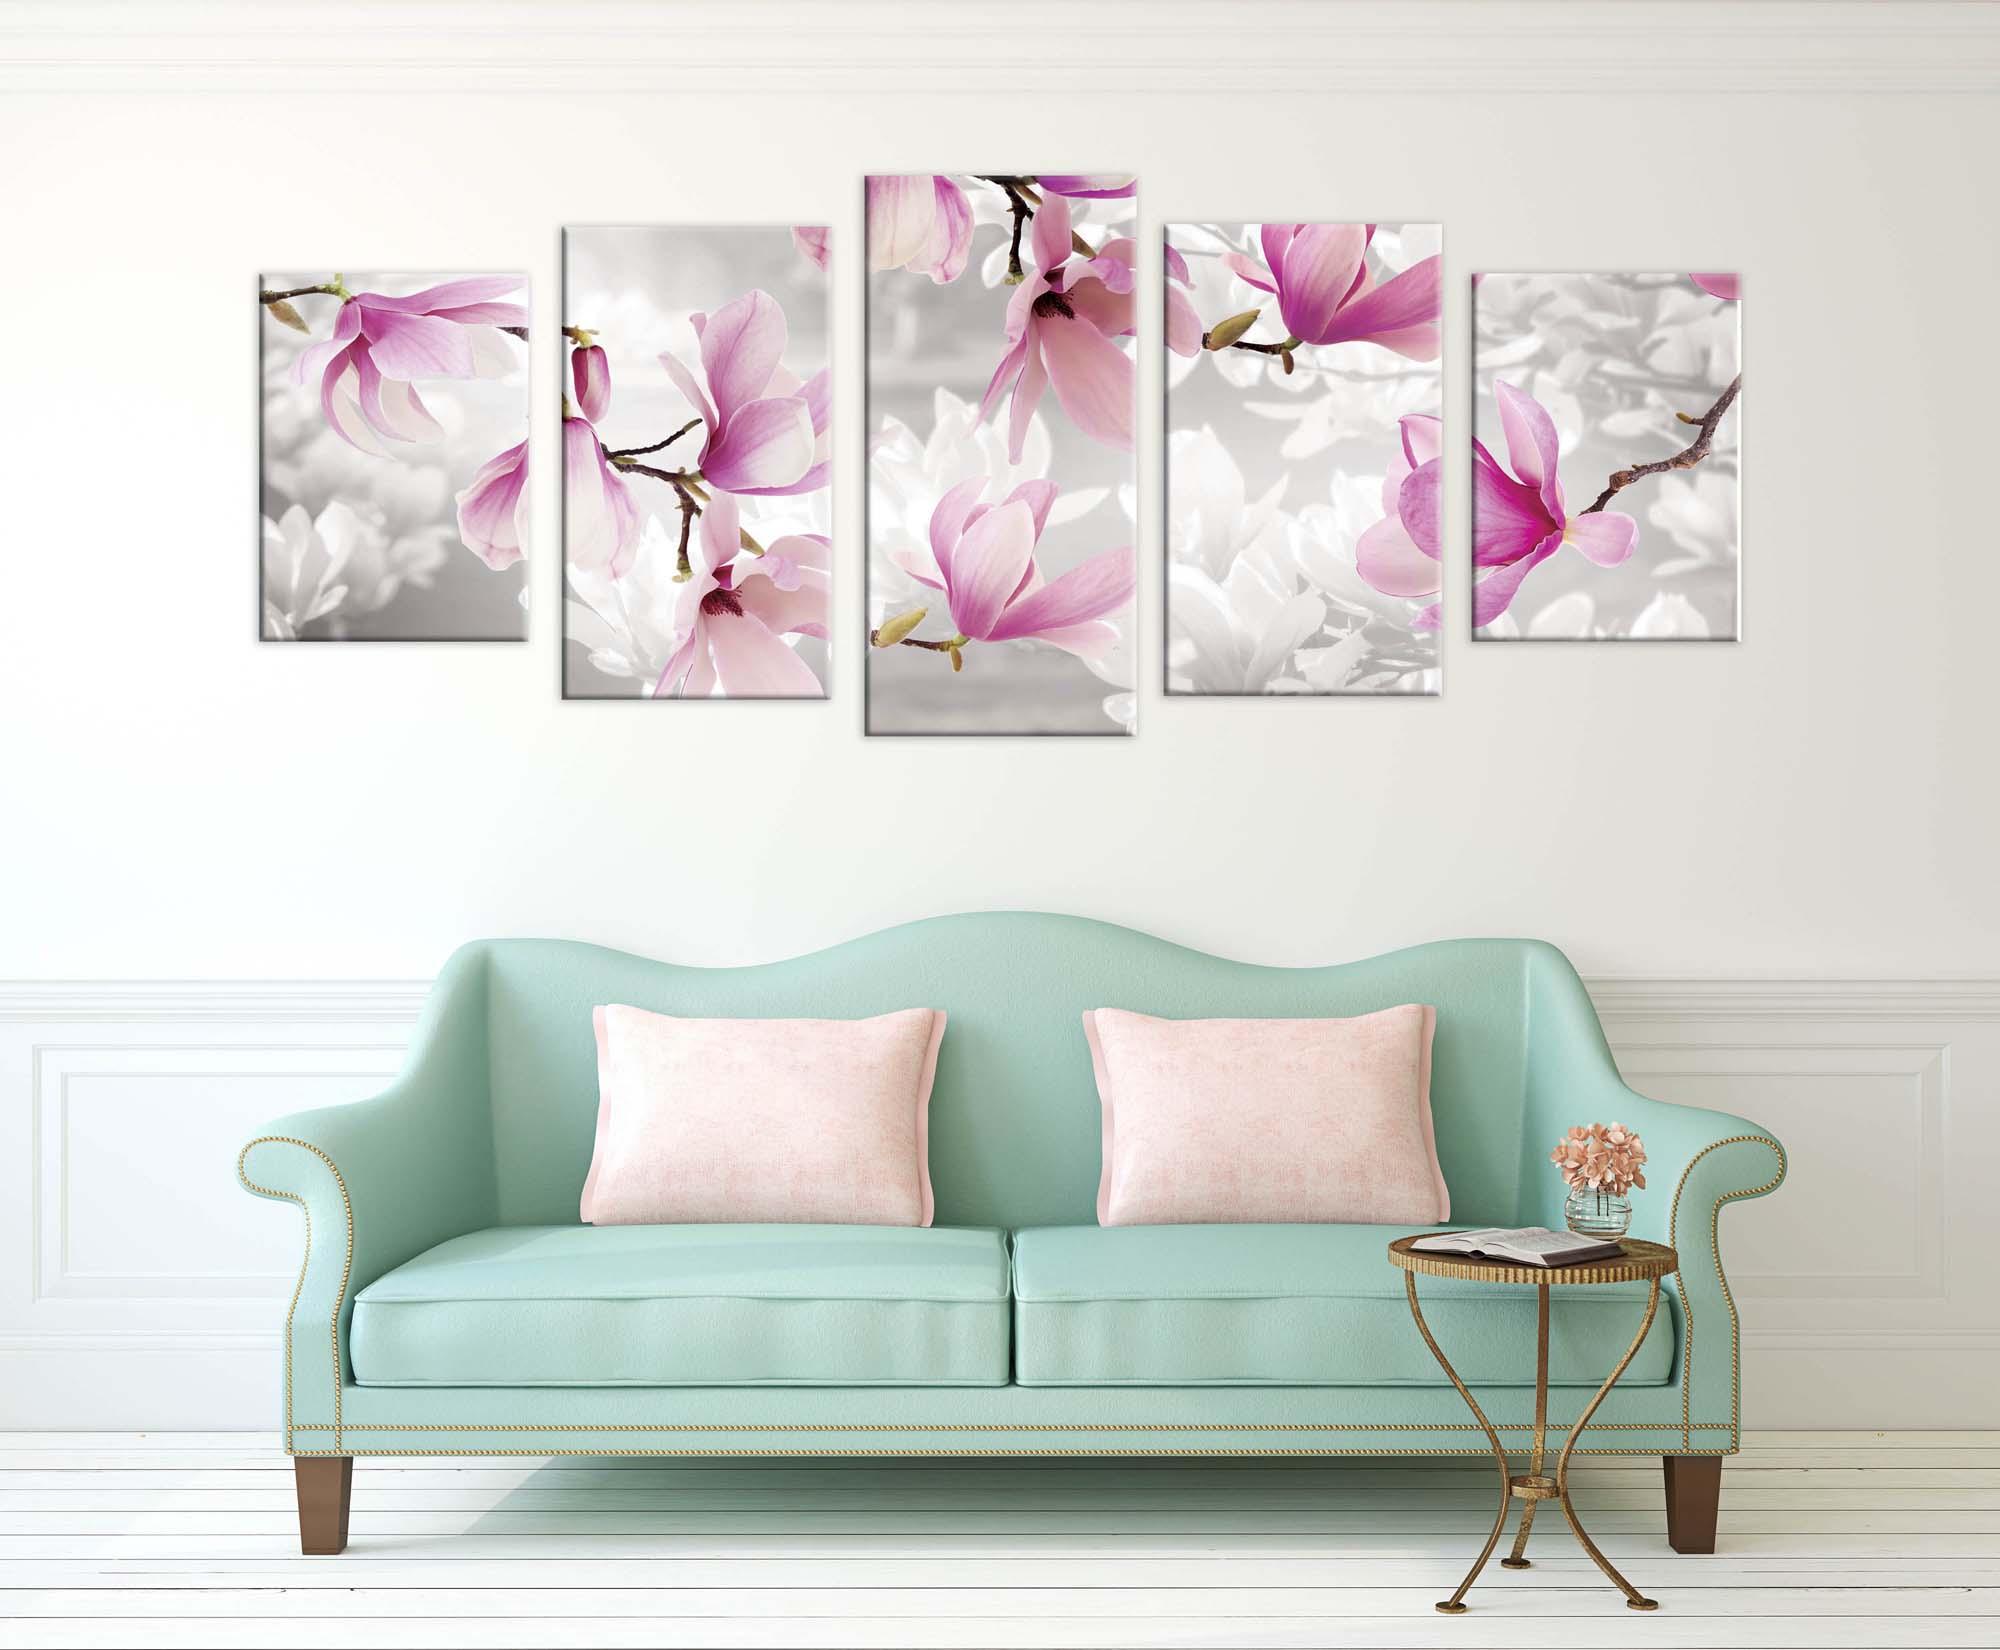 Modular picture - pink delicate flowers on a gray background